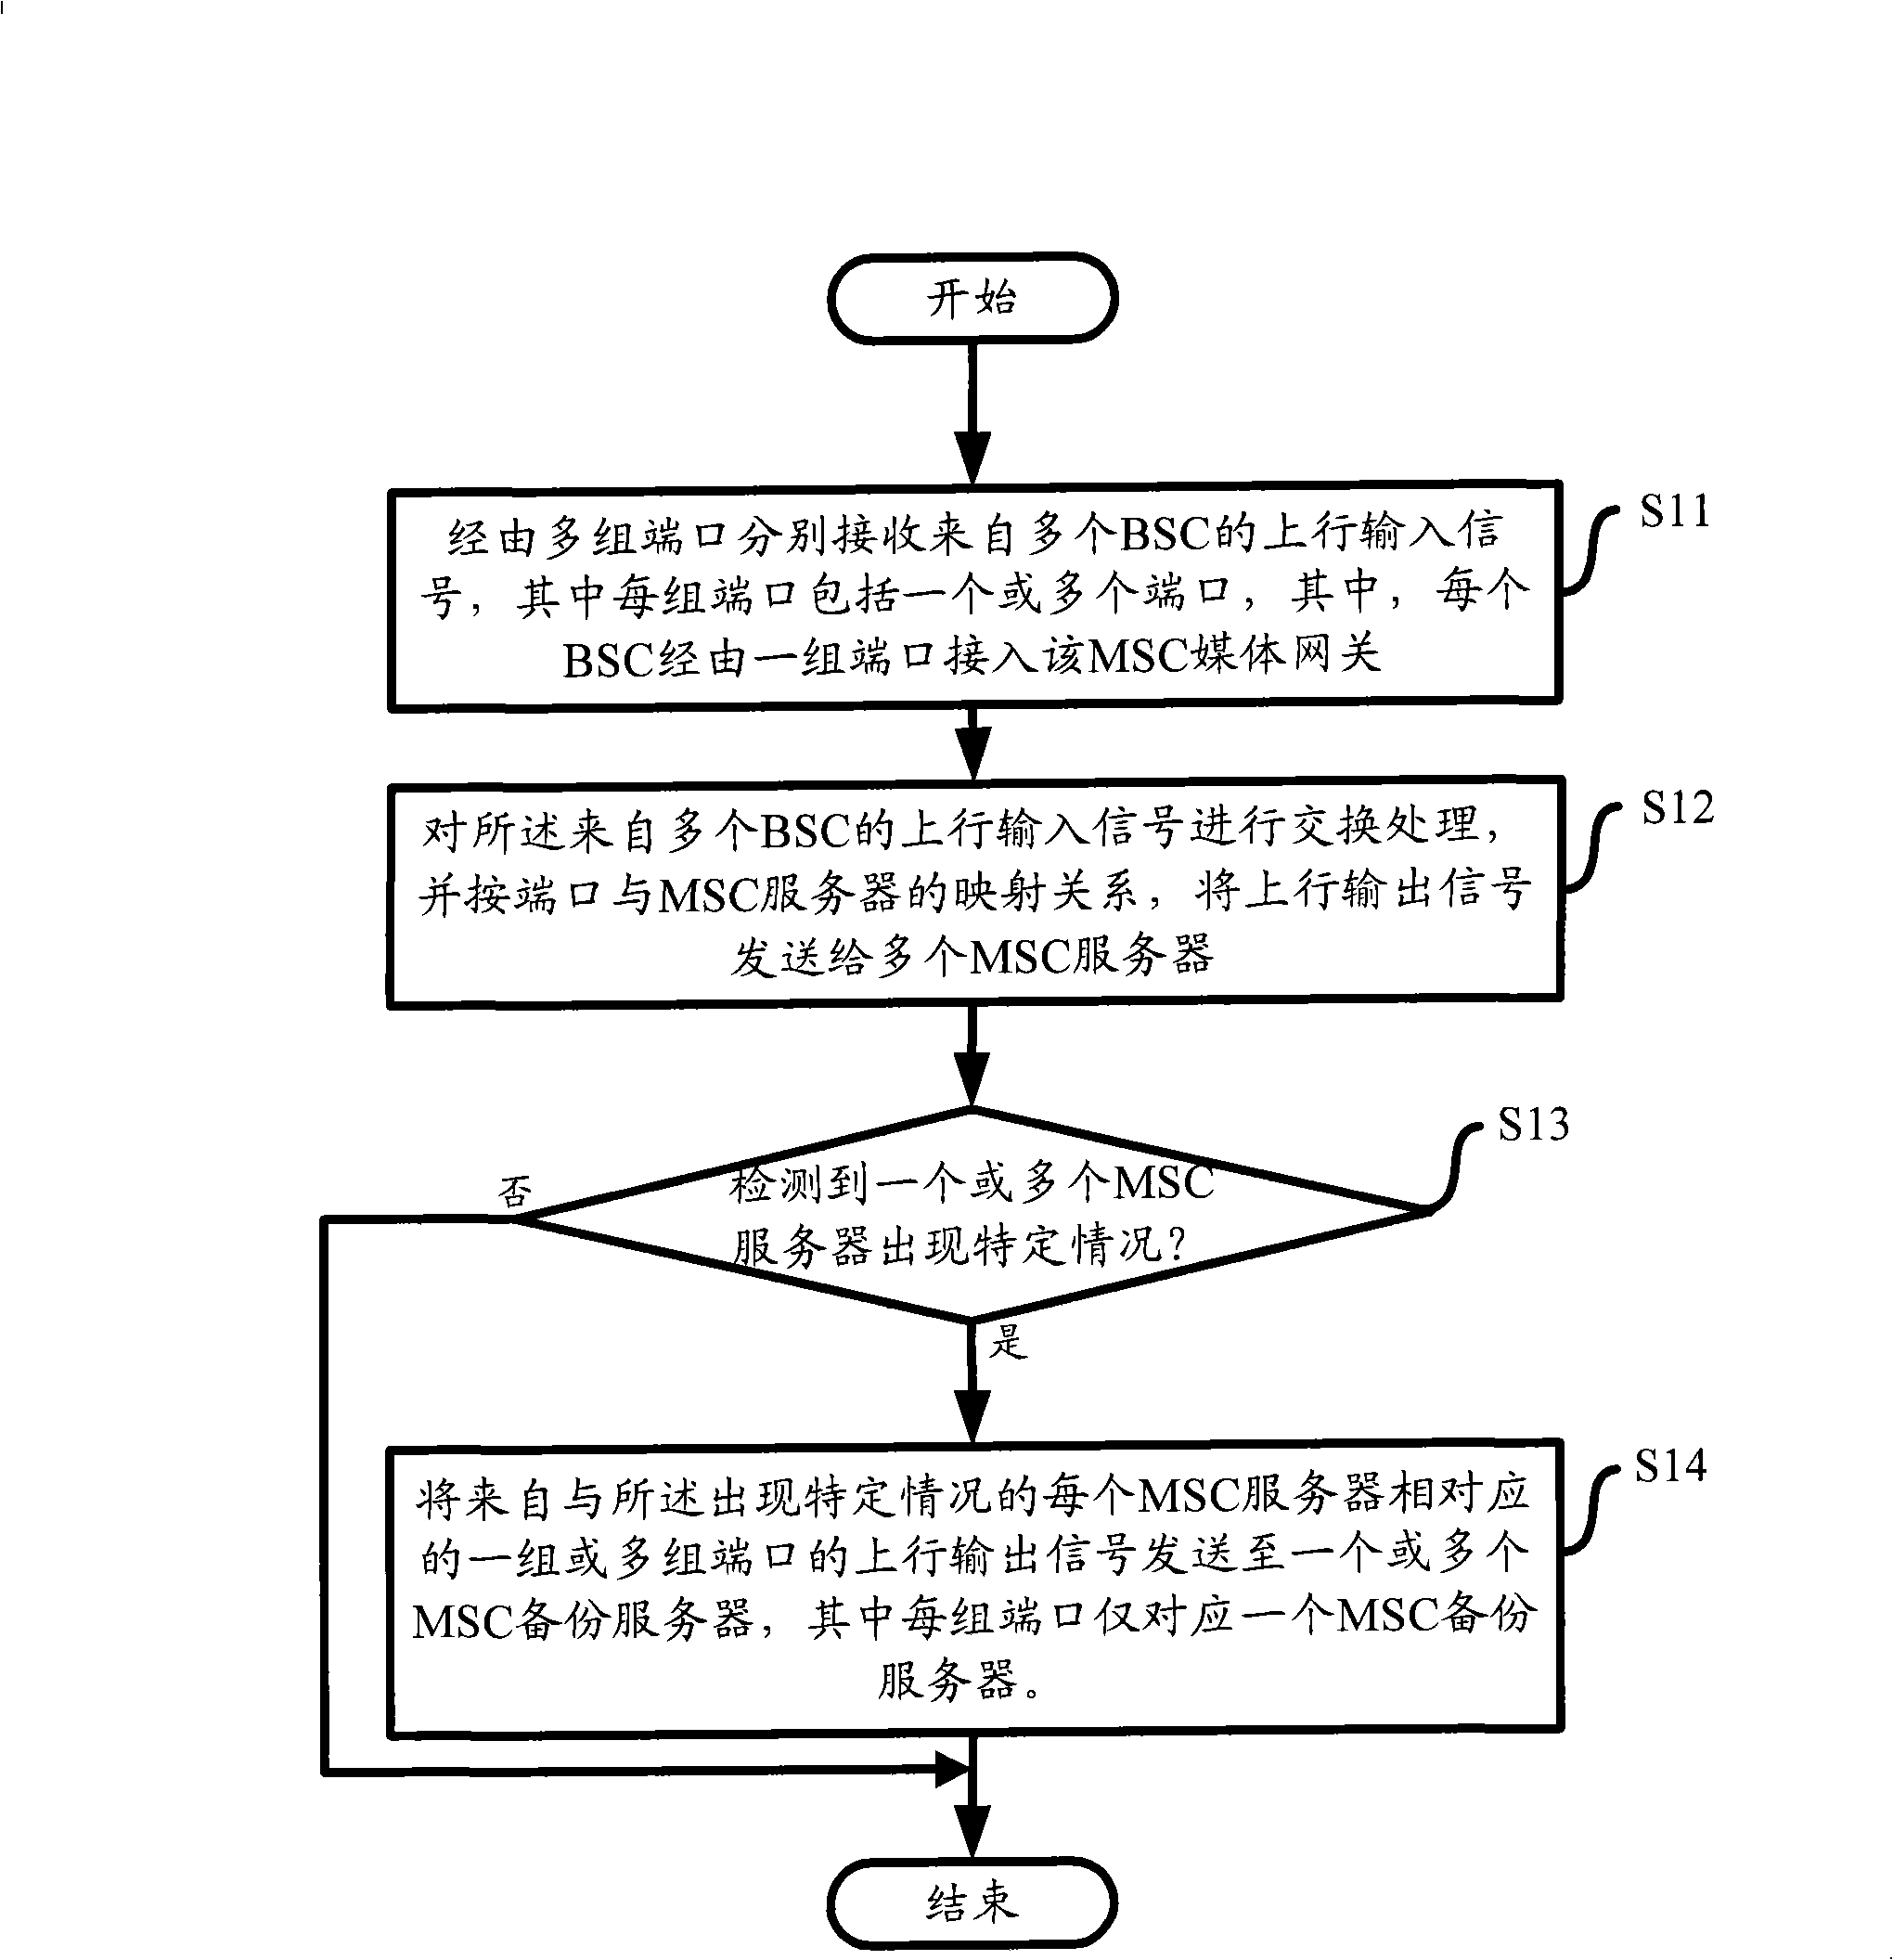 Apparatus and method for controlling signal transmission between BSC and MSC servers